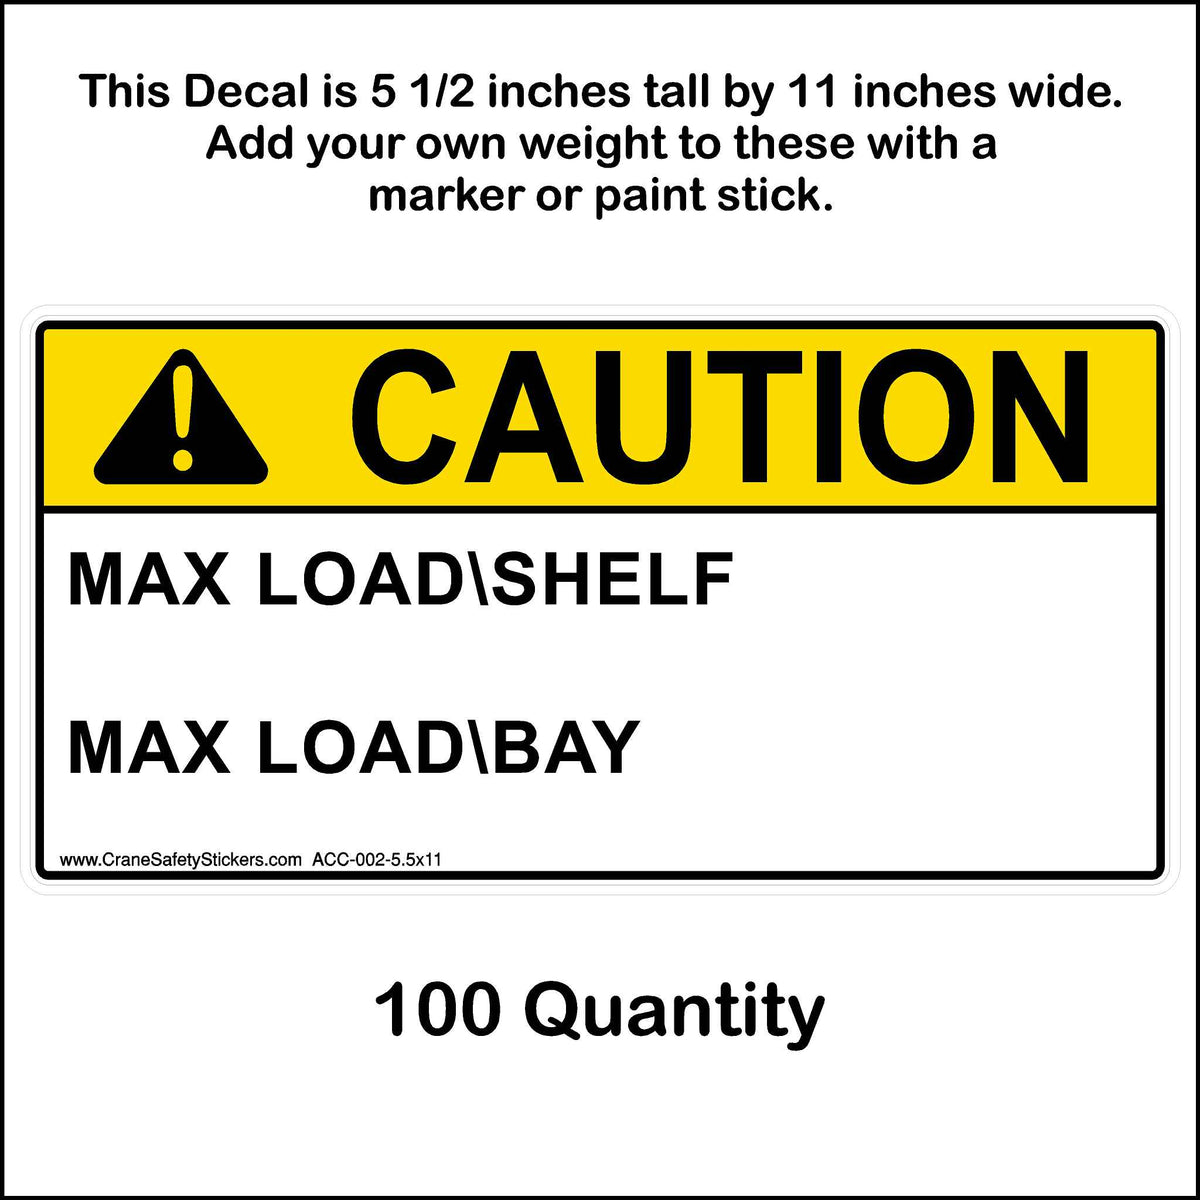 5 1/2 by 11 inch Max load shelf and max load bay sticker 100 quantity